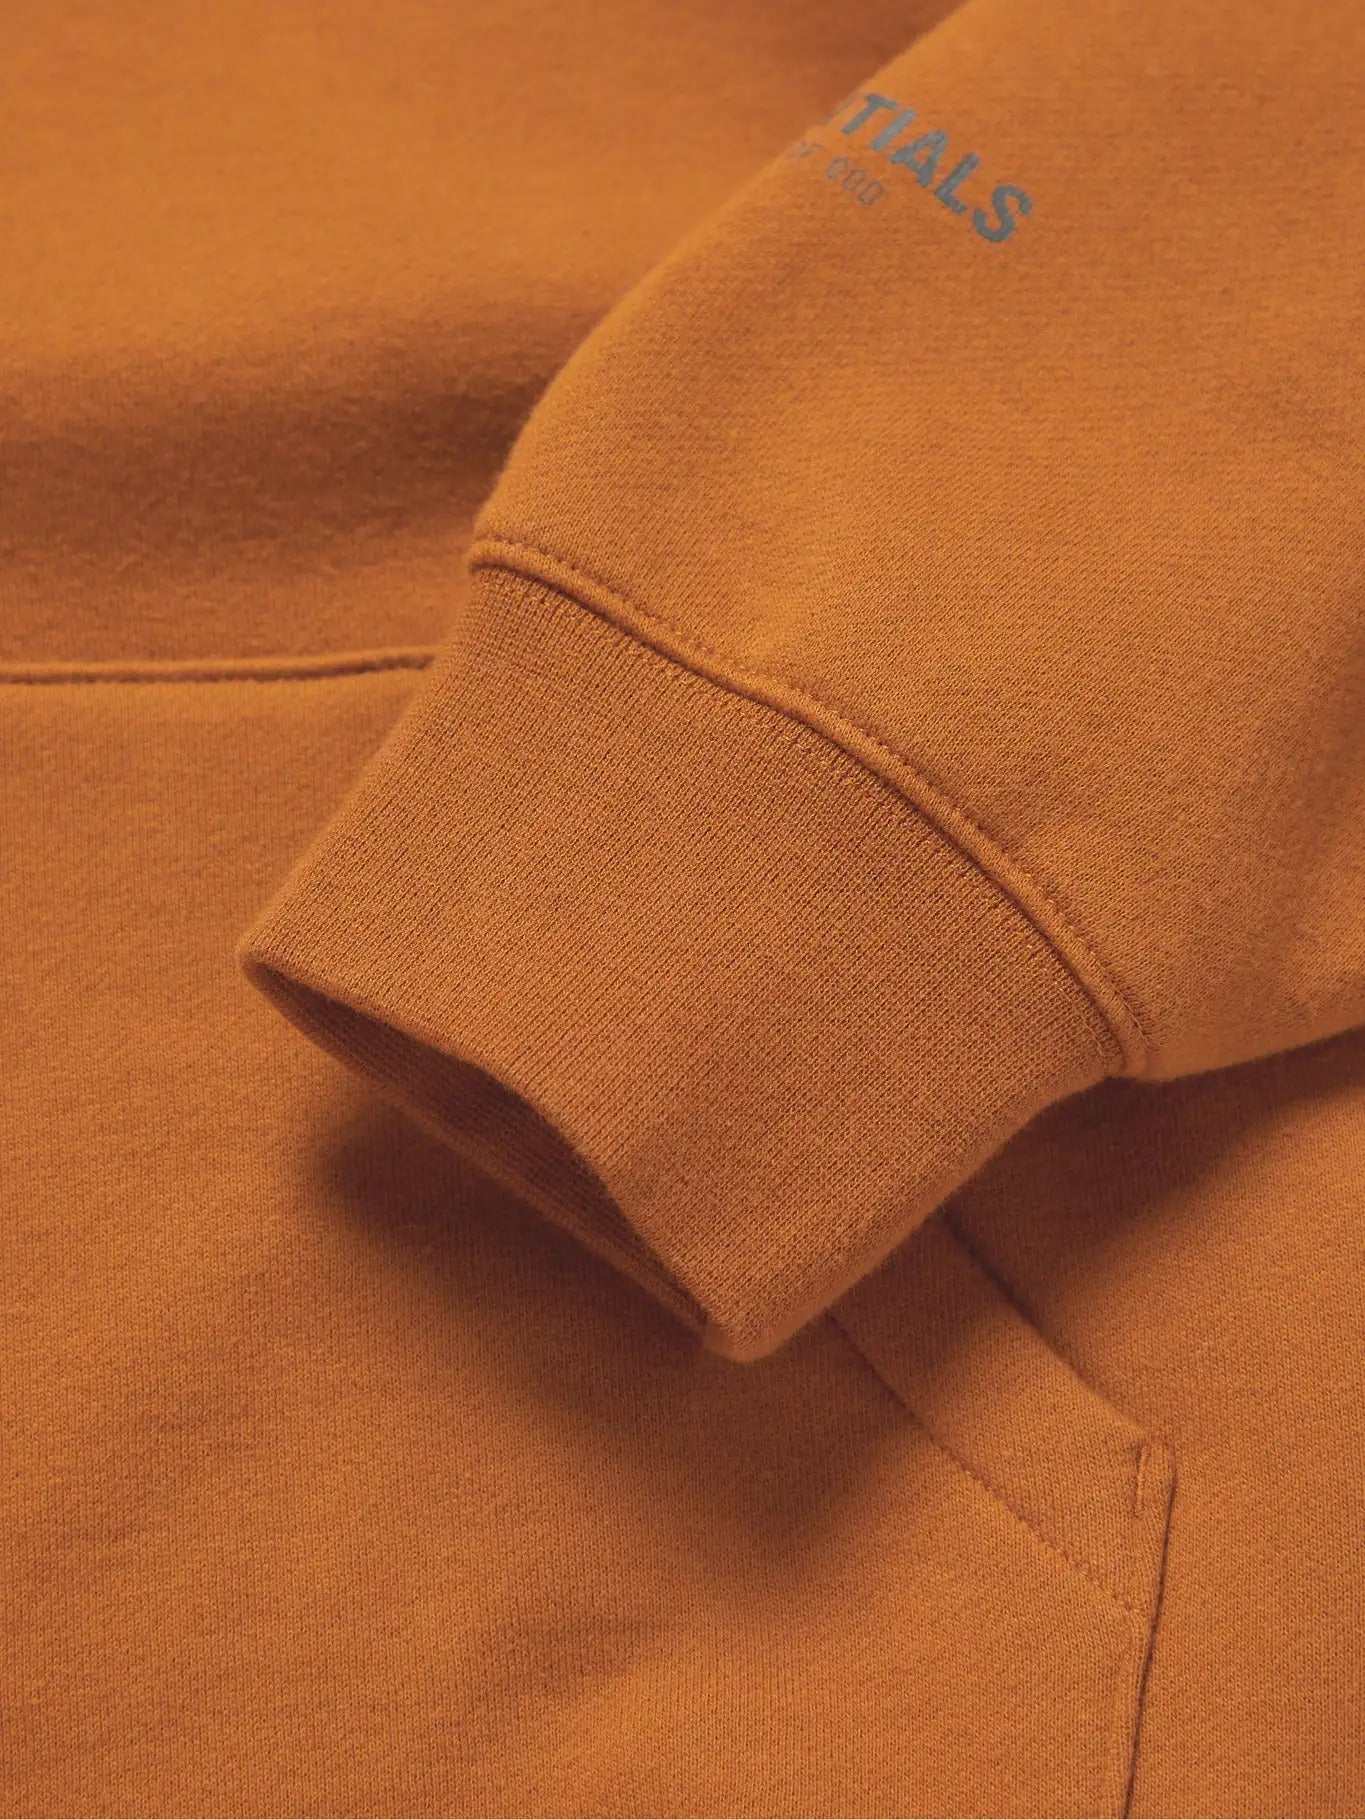 FEAR OF GOD ESSENTIALS LIGHT BROWN CORE COLLECTION HOODIE - Hype Locker UK